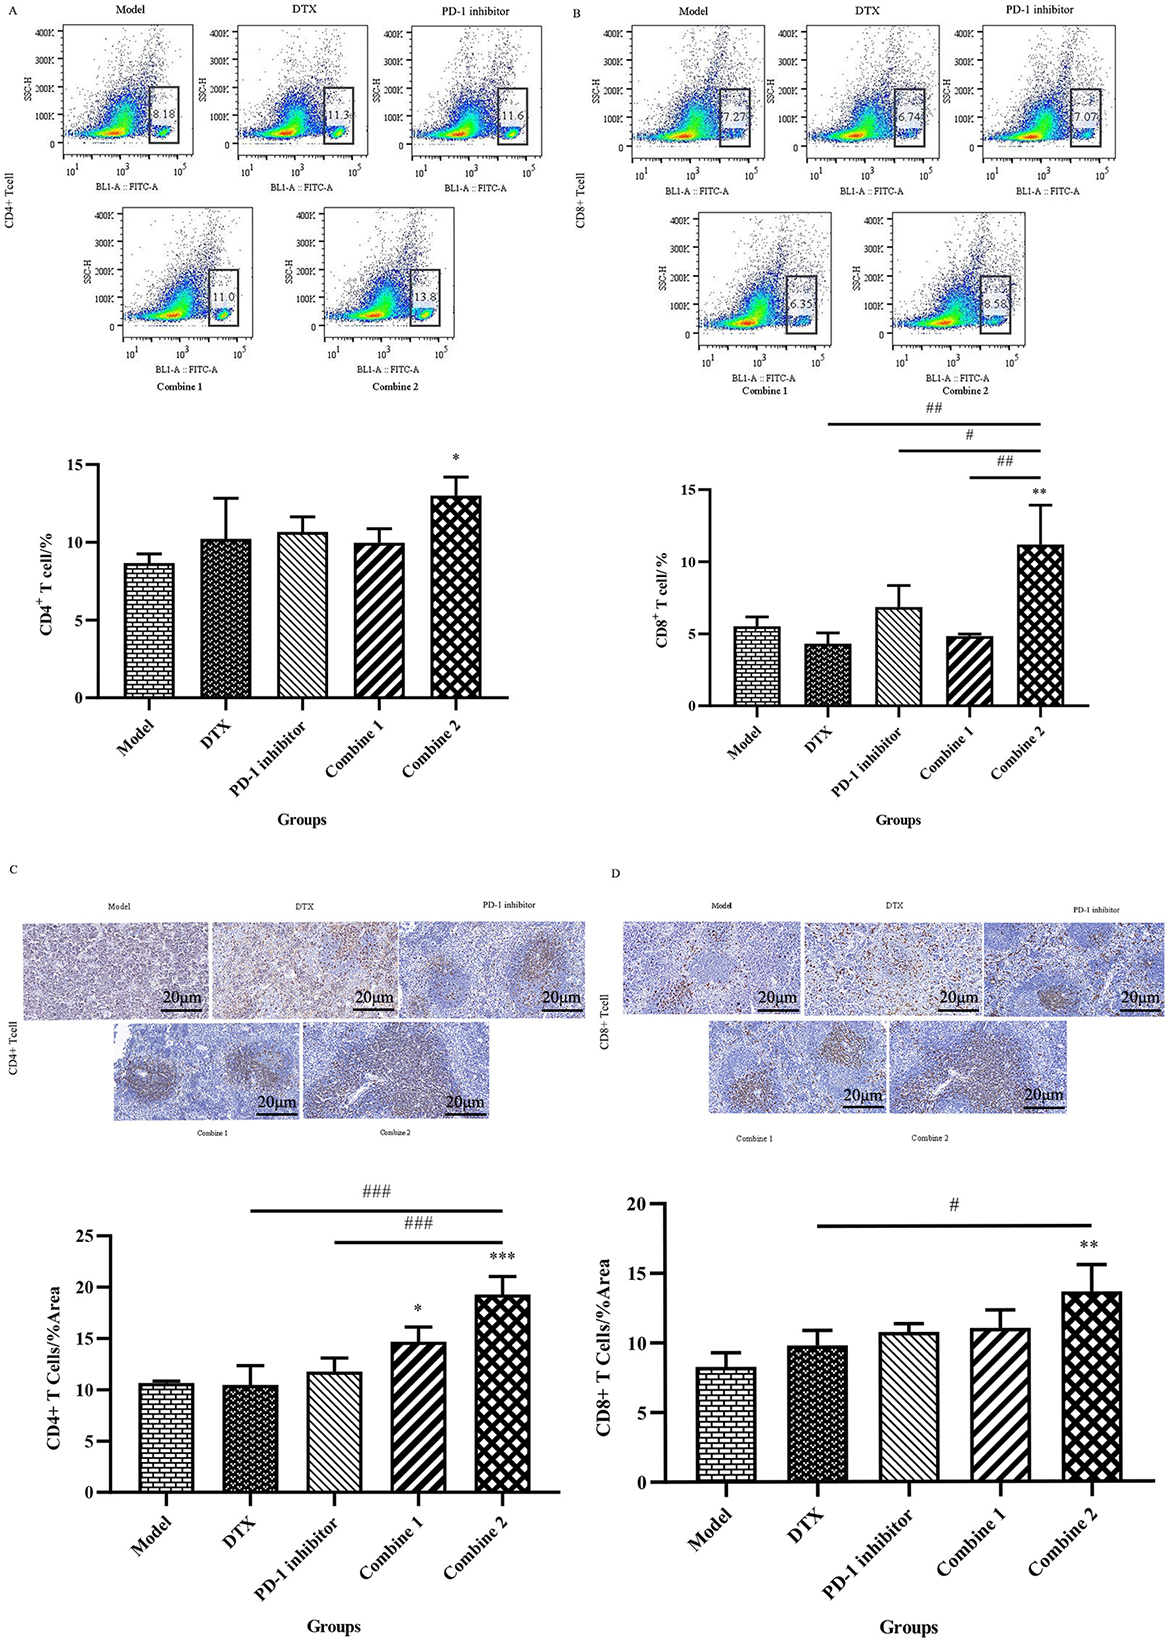 PD-1 inhibitor combined with Docetaxel enhanced the proportion of CD4+ and CD8+T cells in spleen. (A) Spleens were harvested after mice being sacrificed. The spleen tissue was then grind to a uniform splenocyte suspension with a 40 μm cell sieve, then the red blood cells were lysed with red blood cell lysate. After the single-cell suspension at a concentration of 1 × 106 cell/ml was prepared, Anti-Mouse CD4 FITC was added for reaction for 30 min, and then placed in flow cytometry for detection. All the data were presented as means ± SD (n= 3). *P< 0.05 (versus Model group, One-way ANOVA test followved by Tukey’s multiple comparisons test). (B) After the spleens were prepared as a single cell suspension at 1 × 106 cell/ml as described abcve, Anti-Mouse CD8a FITC were added for reaction for 30 min and then placed in flow cytometry for detection. All the data were presented as means ± SD (n= 3). **P< 0.01(versus Model group,One-way ANOVA test followed by Tukey’s multiple comparisons test). #P< 0.05; ##P< 0.01 (versus Combine 2 group, One-way ANOVA test followed by Tukey’s multiple comparisons test). (C) Spleens of other mice were removed and fixed with 4% paraformaldehyde for 24 hours. The fixed tissues were embedded in paraffin and cut into 4 μm thin sections on a paraffin microtome for immunohistochemical experiments. After dewaxing, antigen repair, blocking endogenolus peroxidase, serum sealing and CD4 antibody incubation, DAB chromogenic reaction, nucleus counterstaining, dehydration and mounting were performed. The prepared sections were examined under the microscope, and images were collected and analyzed by Image J.All the data were presented as means ± SD (n= 3). *P< 0.05; ***P< 0.001(versus Model group, One-way ANOVA test followed by Tukey’s multiple comparisons test). ####P< 0.01(versus Combine 2 group, One-way ANOVA test followed by Tukey’s multiple comparisons test). (D) Following the procedure described above, CD8 antibodies were added during antibody incubation. The preparedsections were examined under the microscope, and images were collected and analyzed by Image J.All the data were presented as means ± SD (n= 3). **P< 0.01(versus Model group, One-way ANOVA test followed by Tukey’s multiple comparisons test). #P< 0.05(versus Combine 2 group, One-way ANOVA test followed by Tukey’s multiple comparisons test).